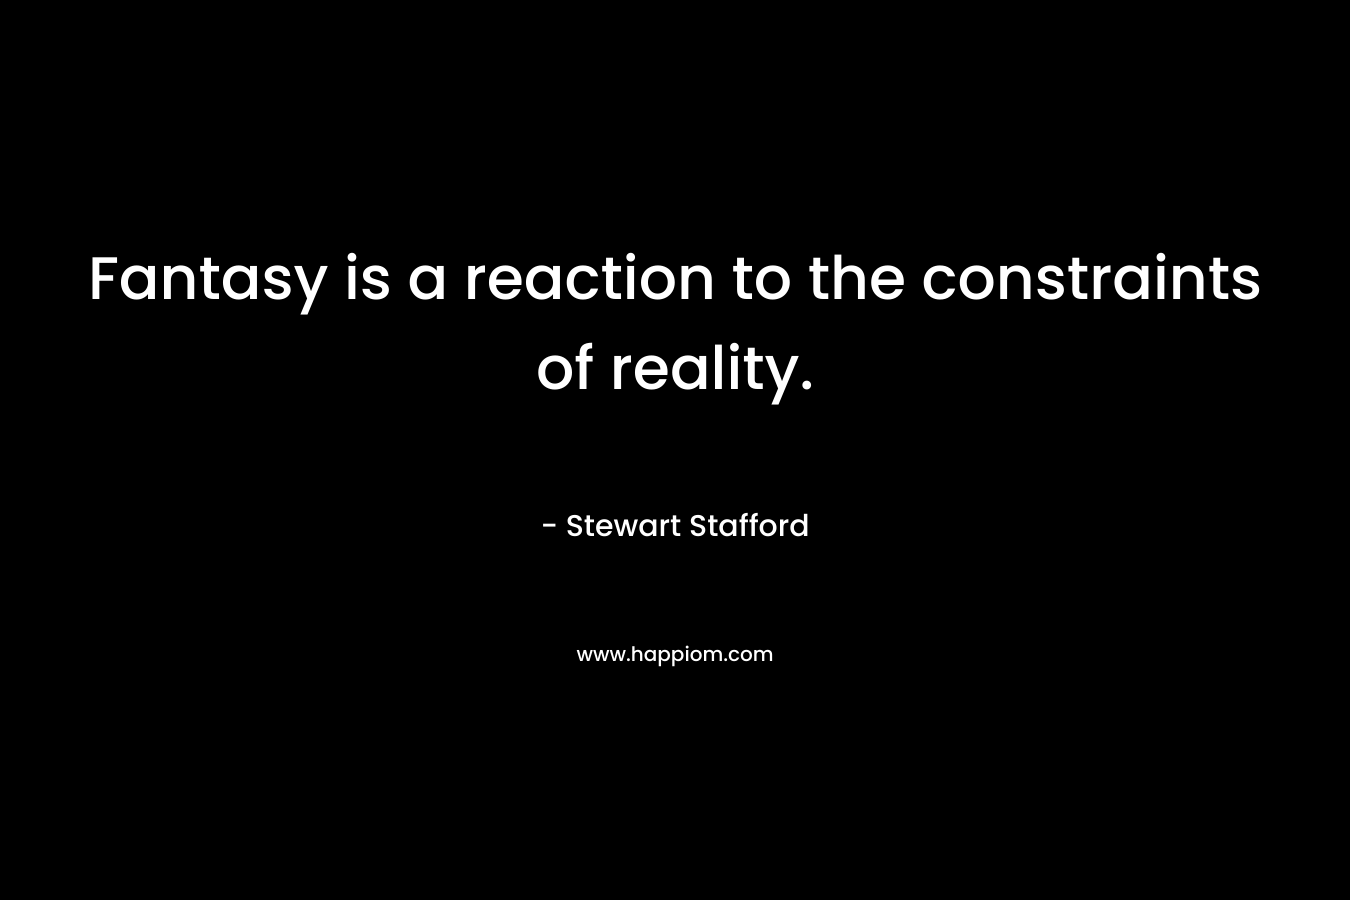 Fantasy is a reaction to the constraints of reality.